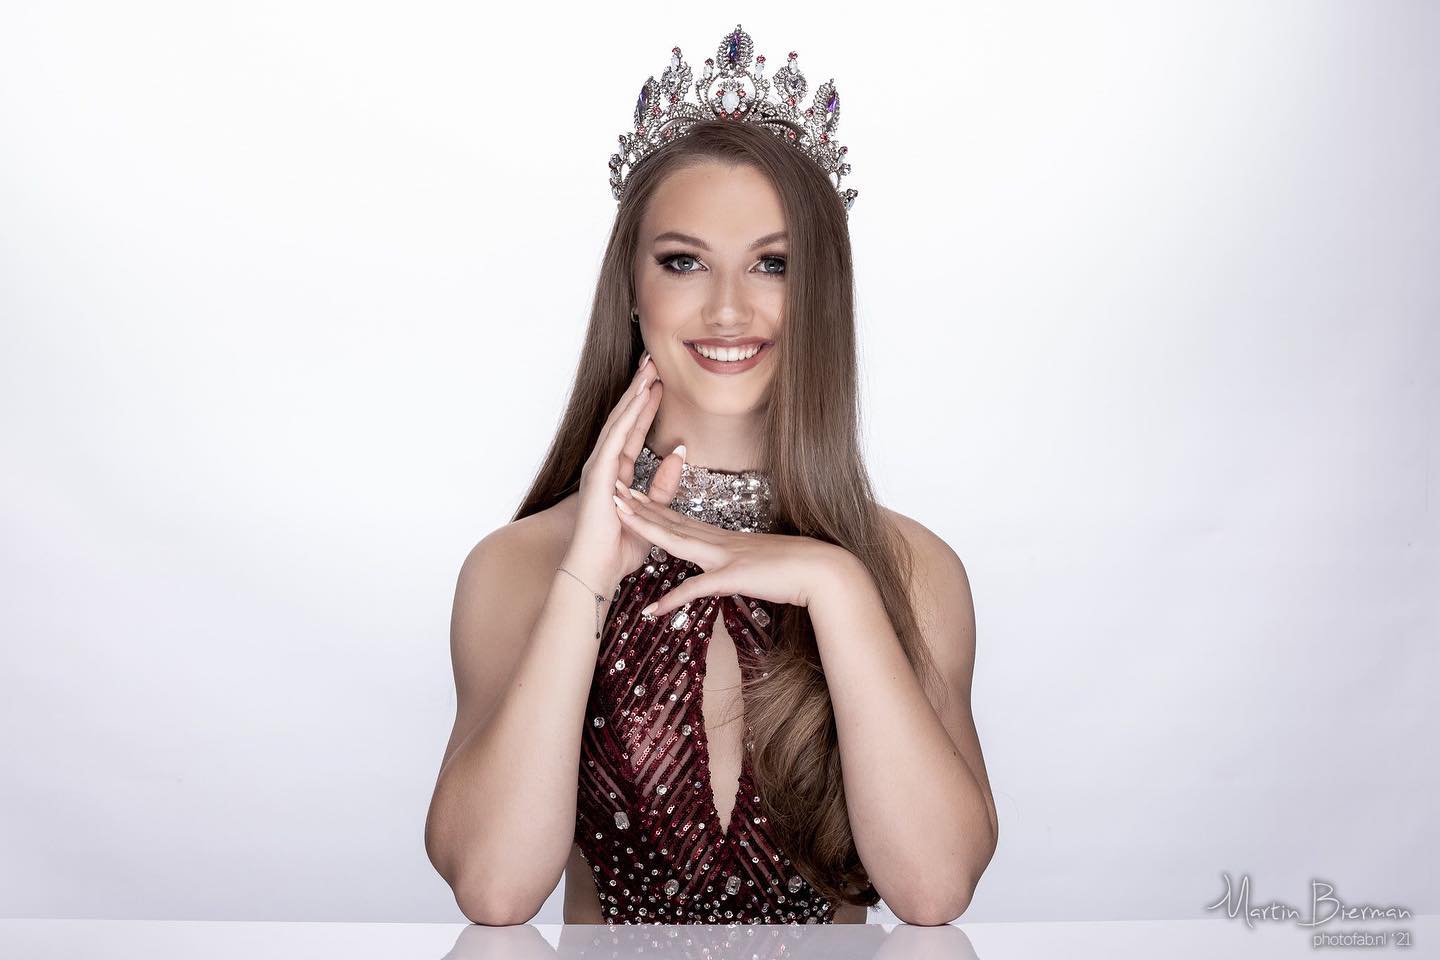 10 questions for Miss Teen of the Netherlands 2020/2021, Anne Brouwer ...